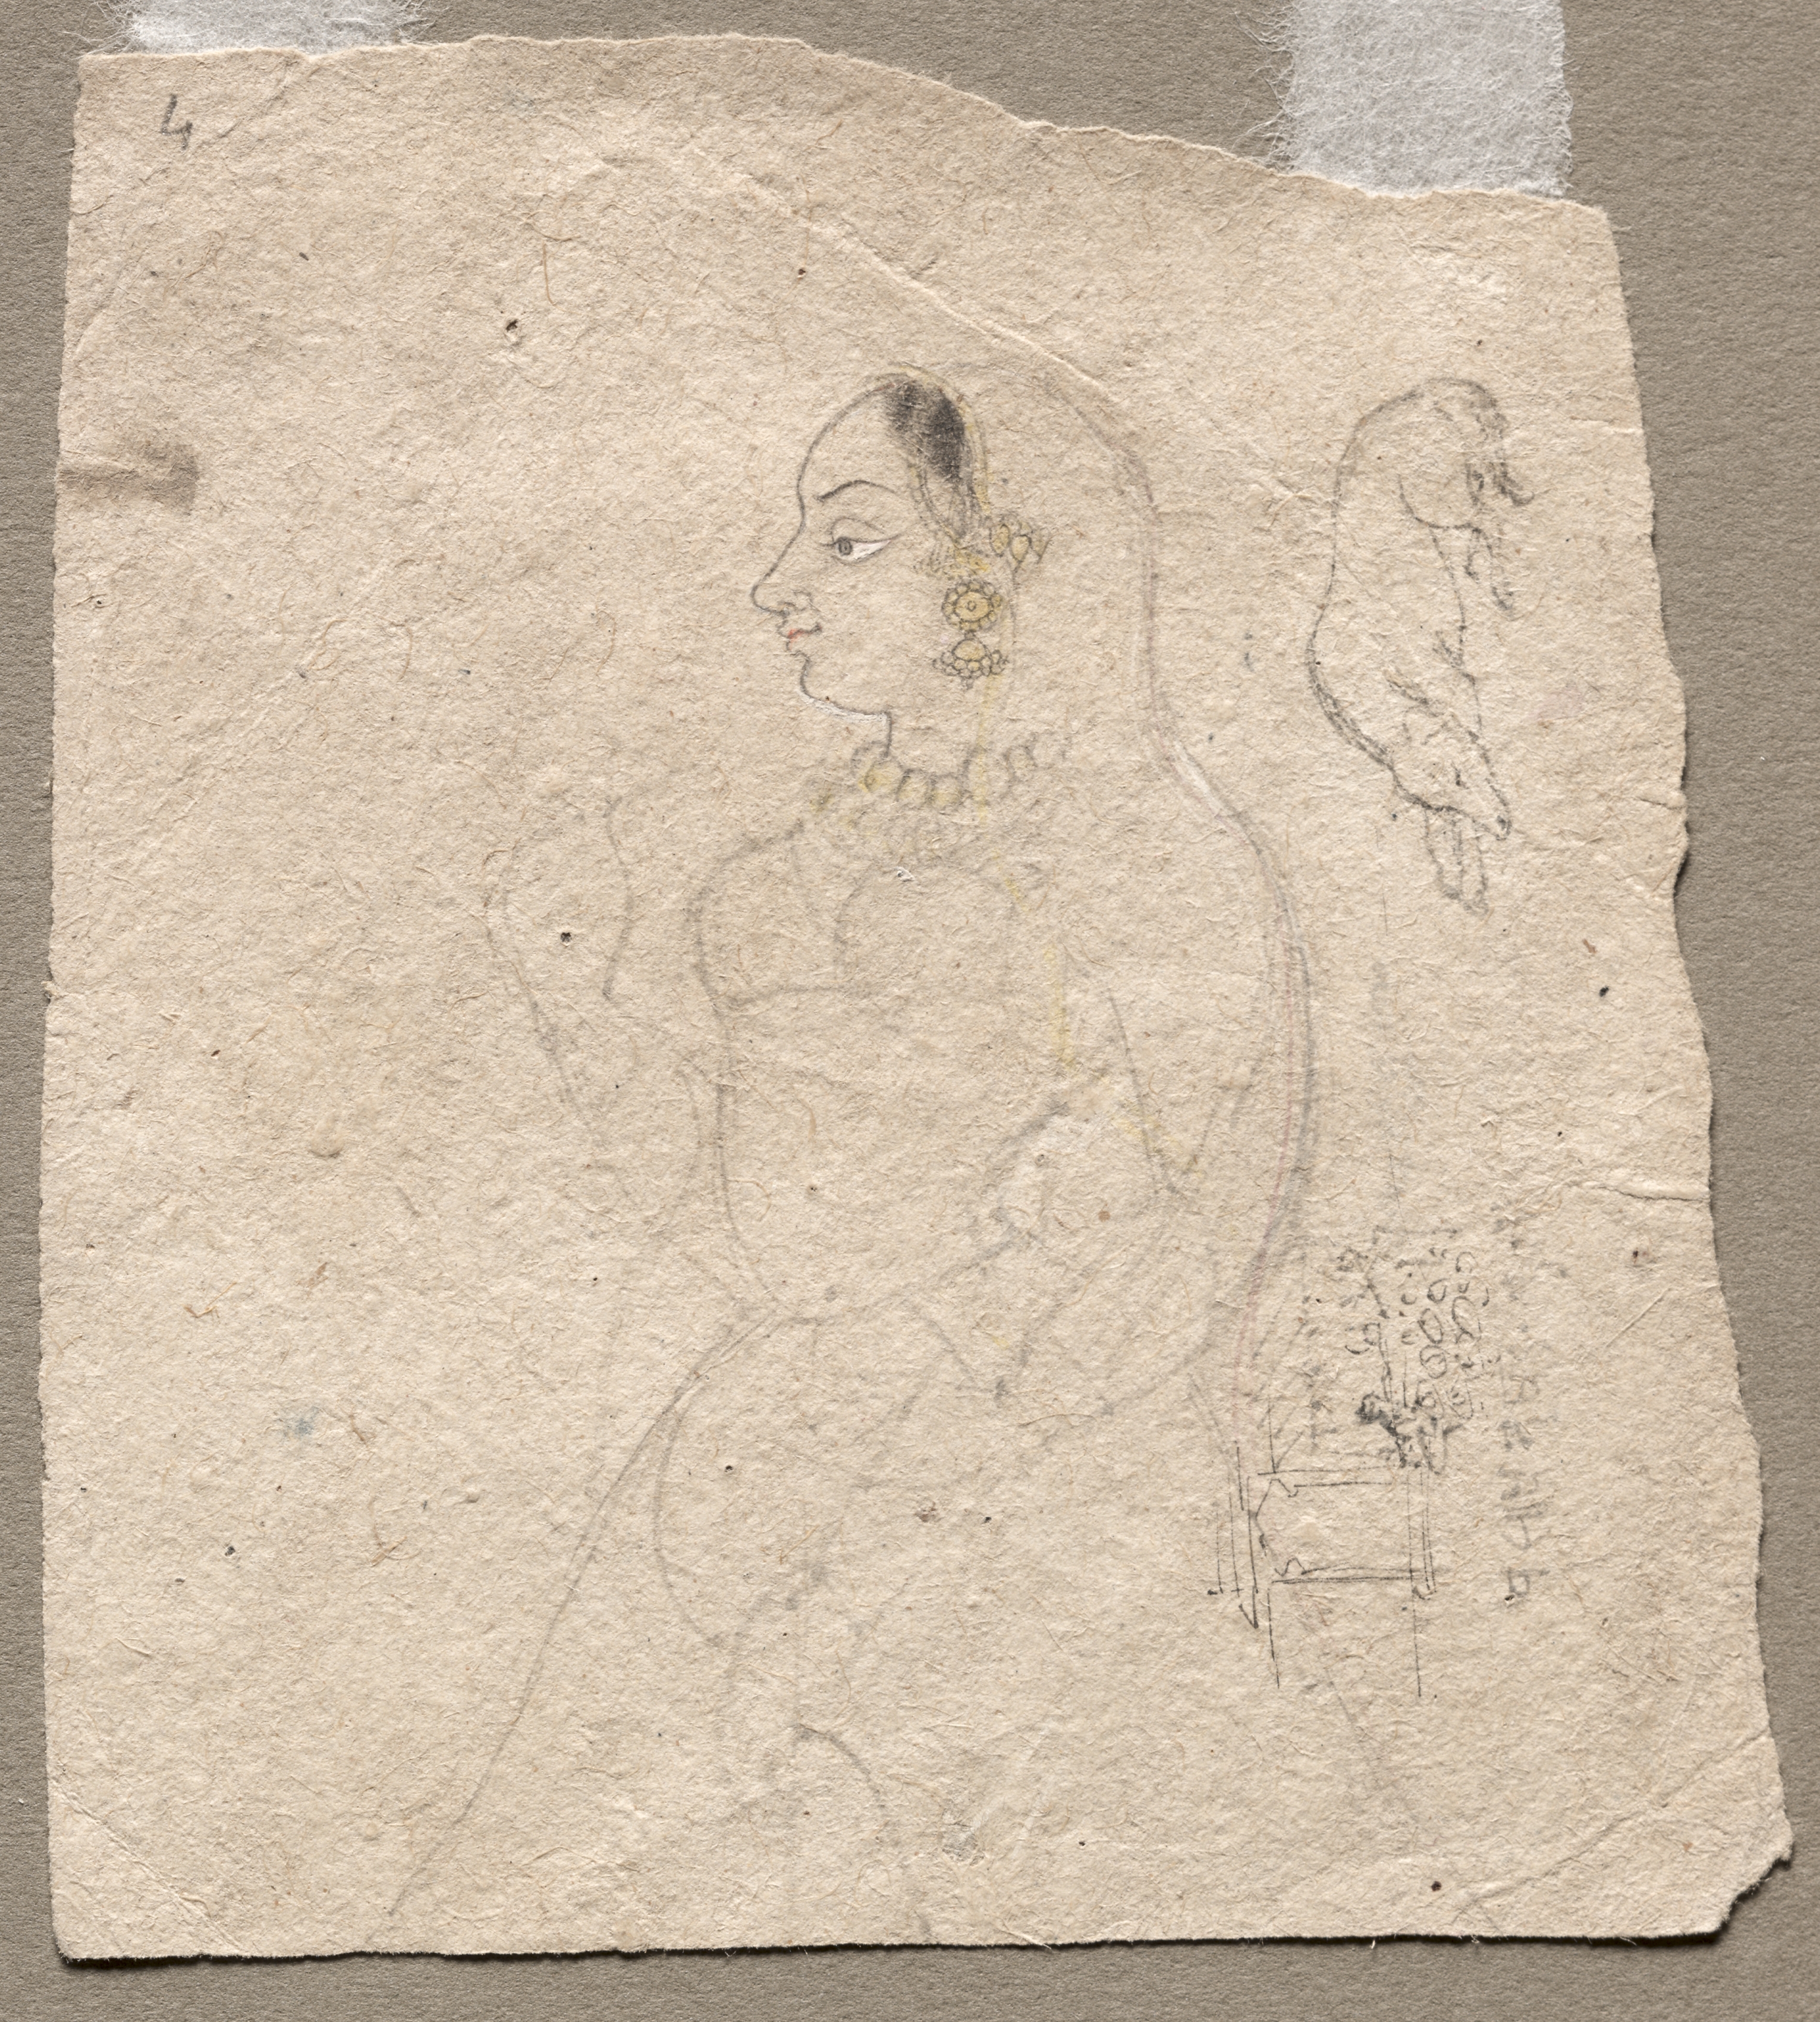 Sketch of  a Woman with an elephant and other animals on reverse